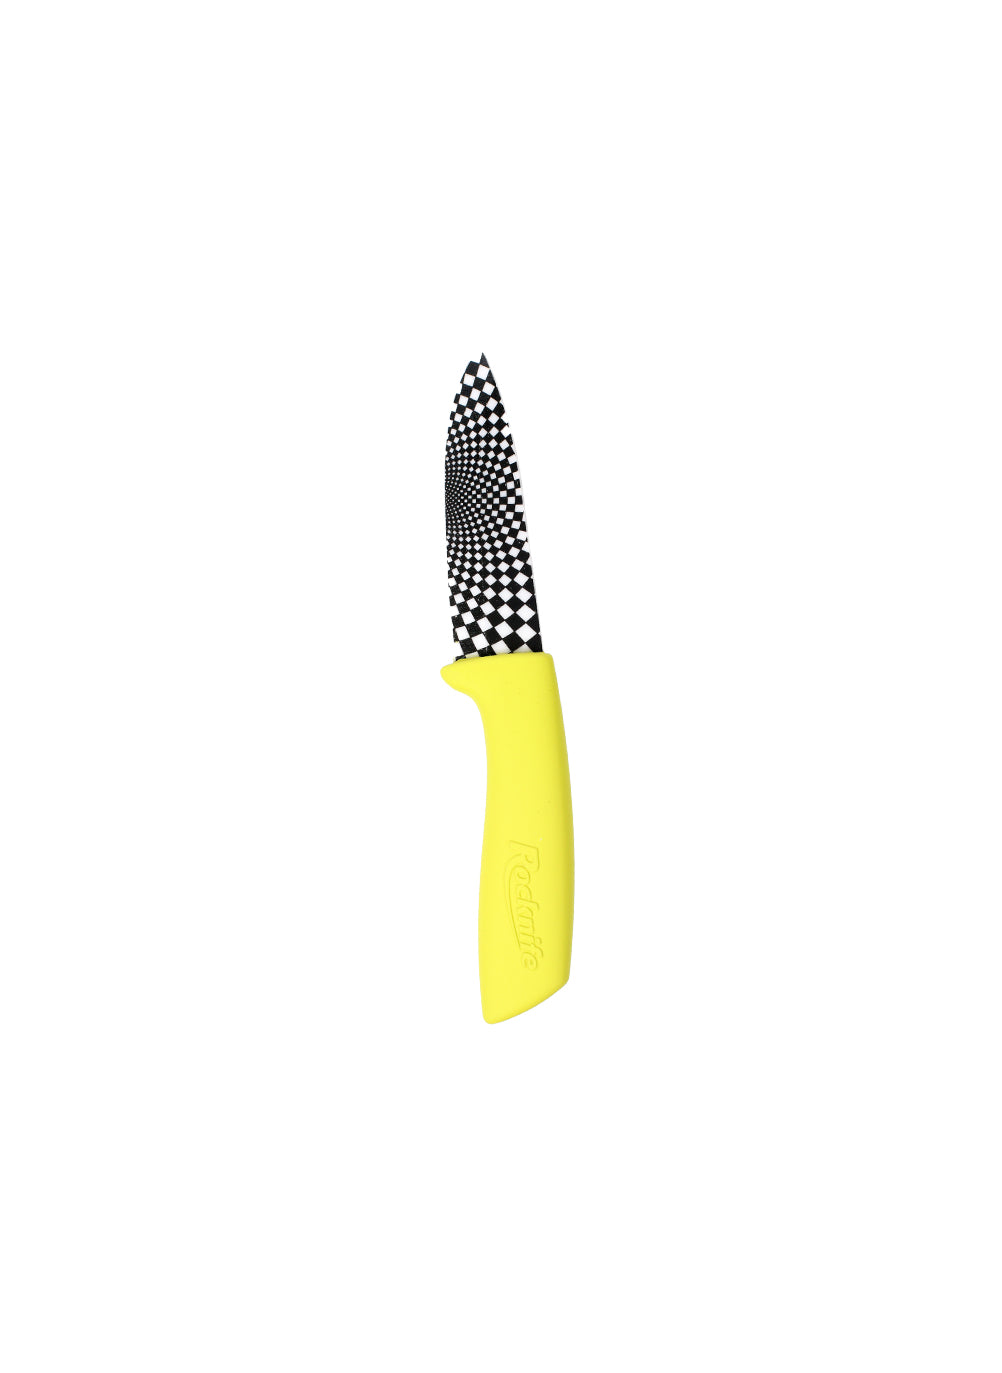 3 Inch Ceramic Kitchen Knife - Lime Green